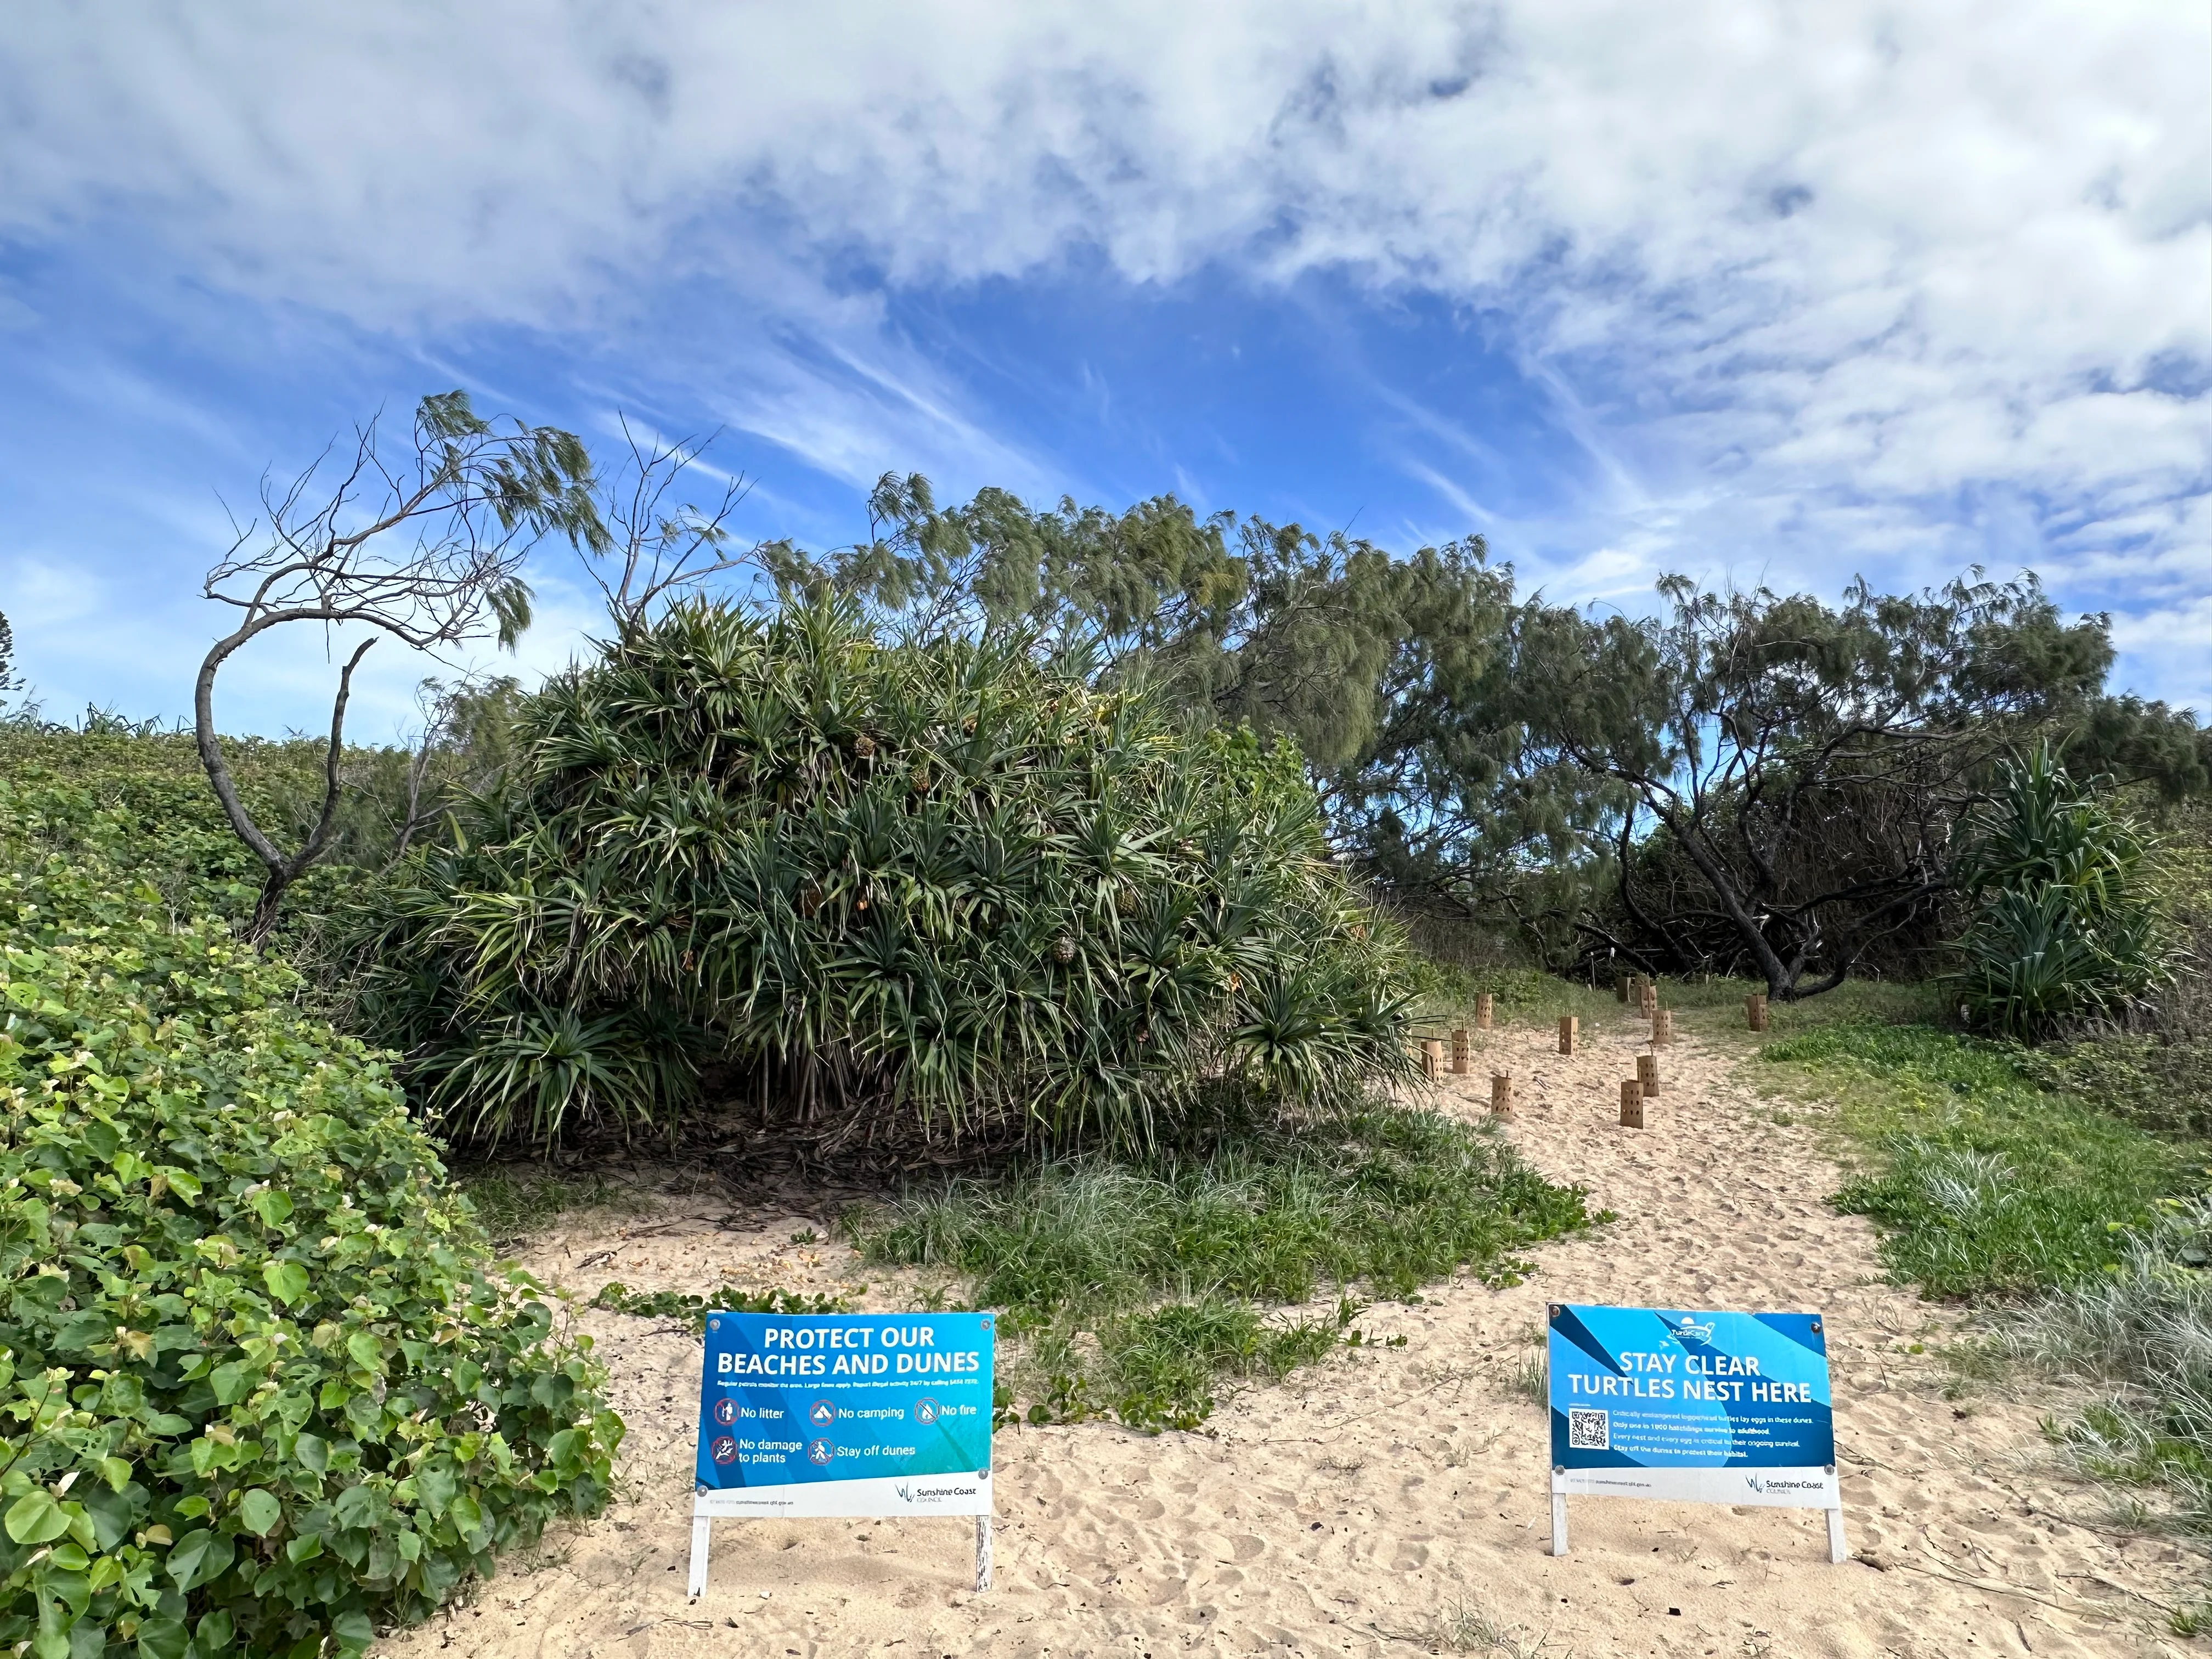 An informal access has also been closed for the protection of nesting turtles.